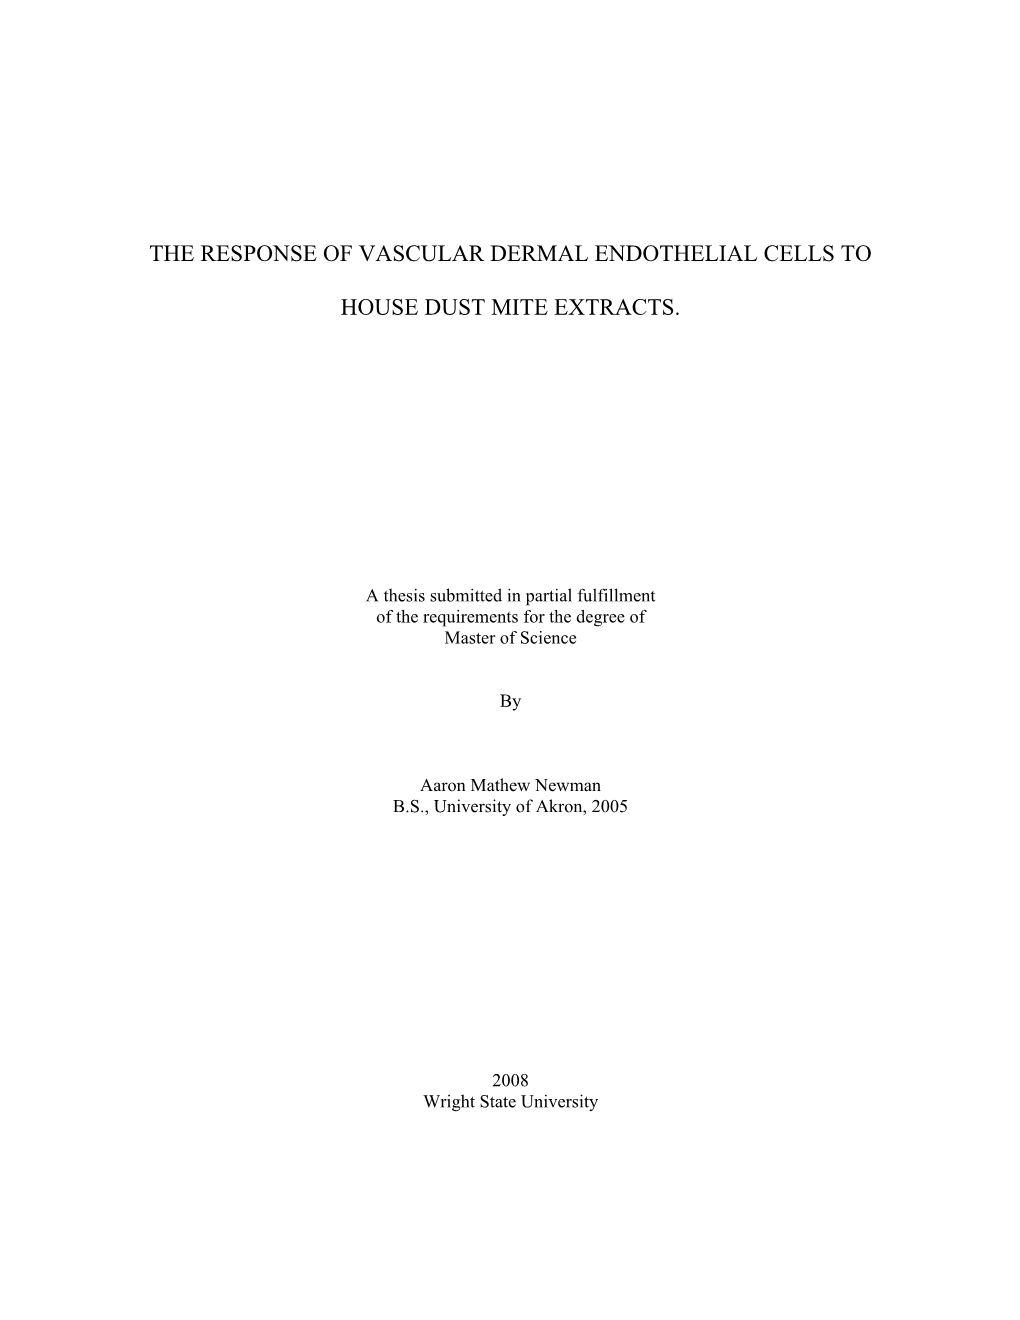 The Response of Vascular Dermal Endothelial Cells To